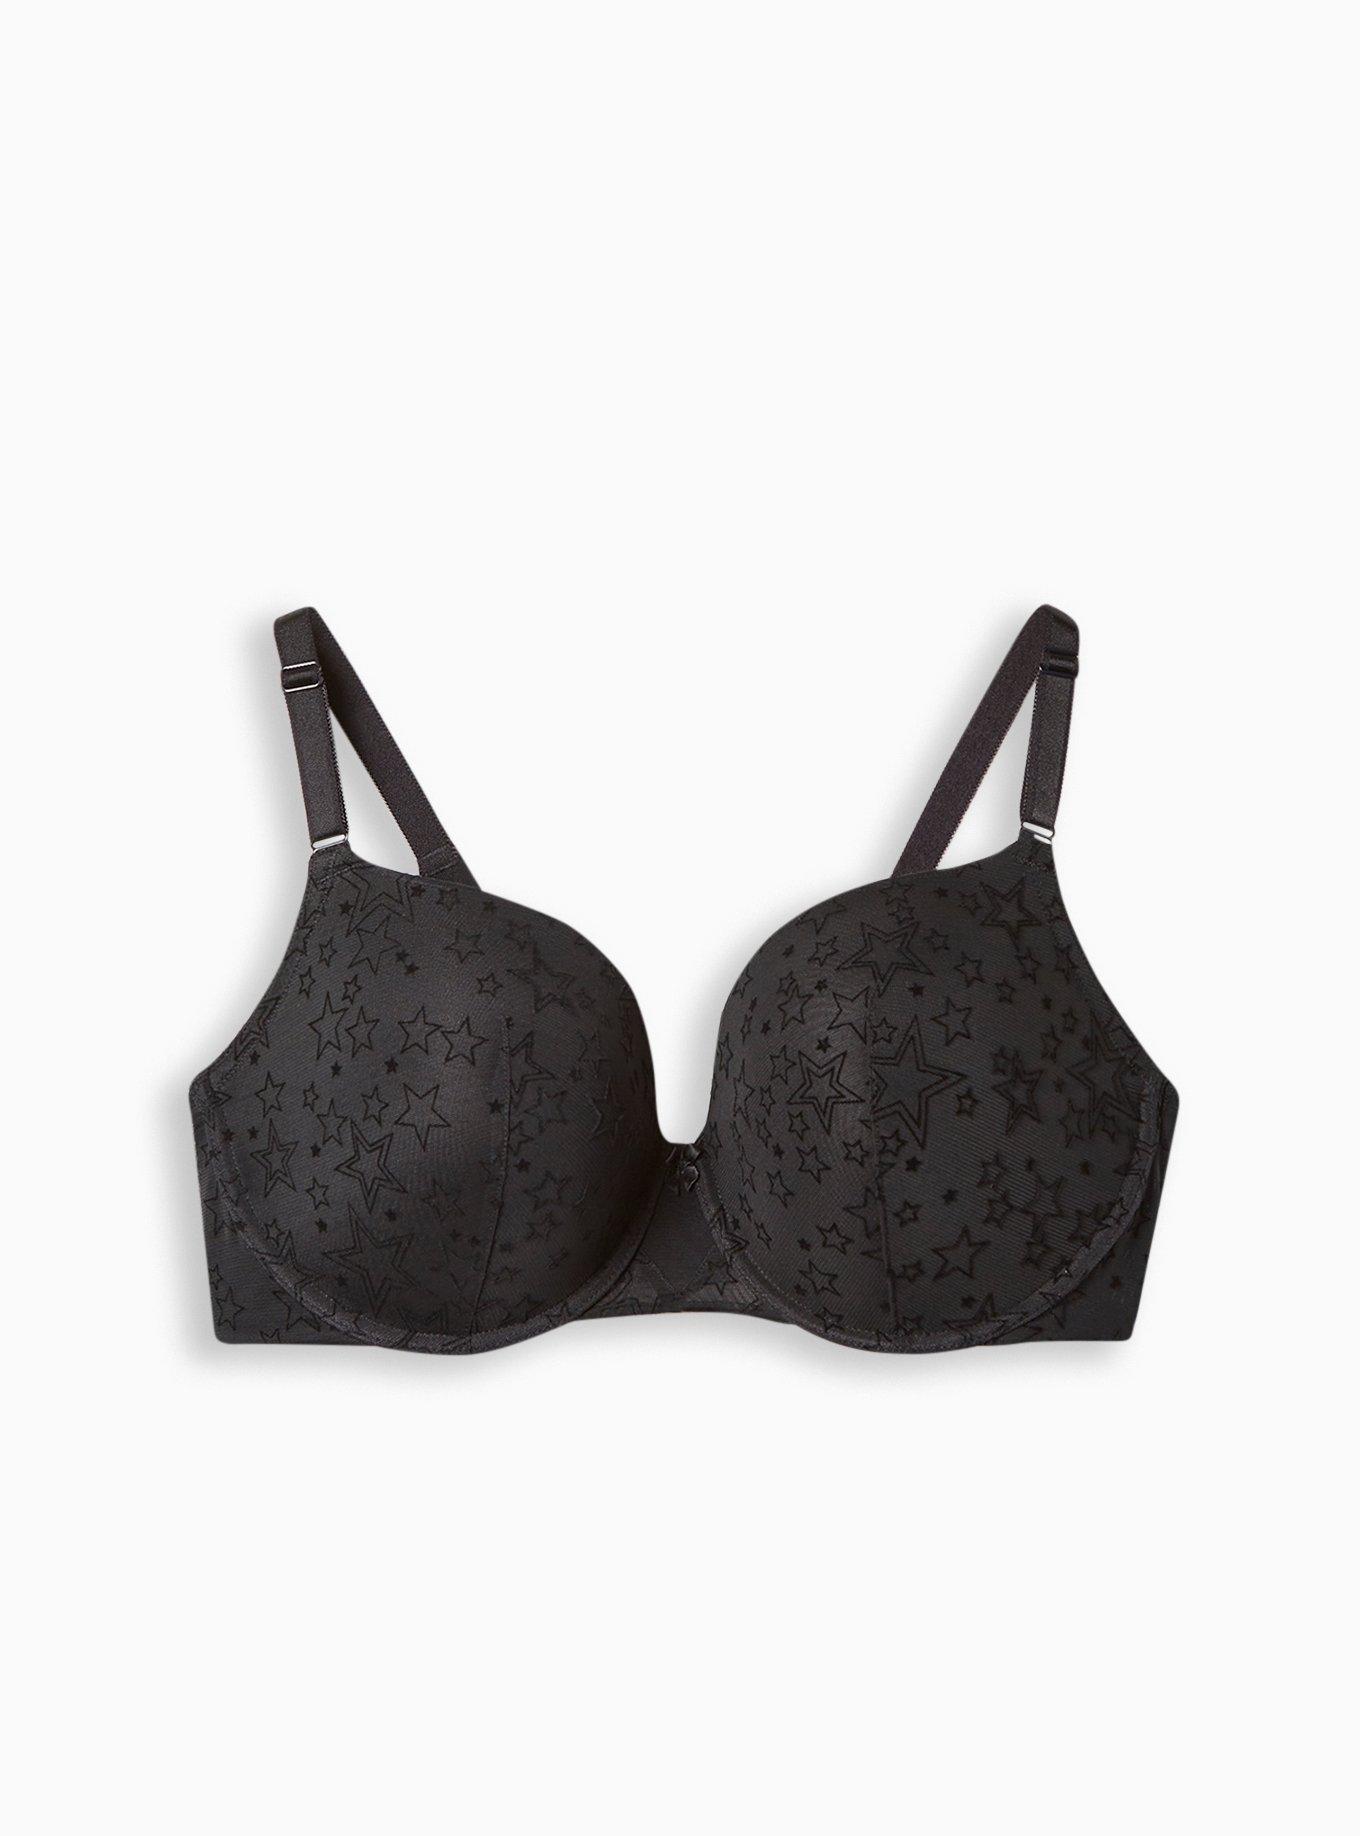 Penny Women Push-up Bra - Buy Black with Pink Penny Women Push-up Bra  Online at Best Prices in India